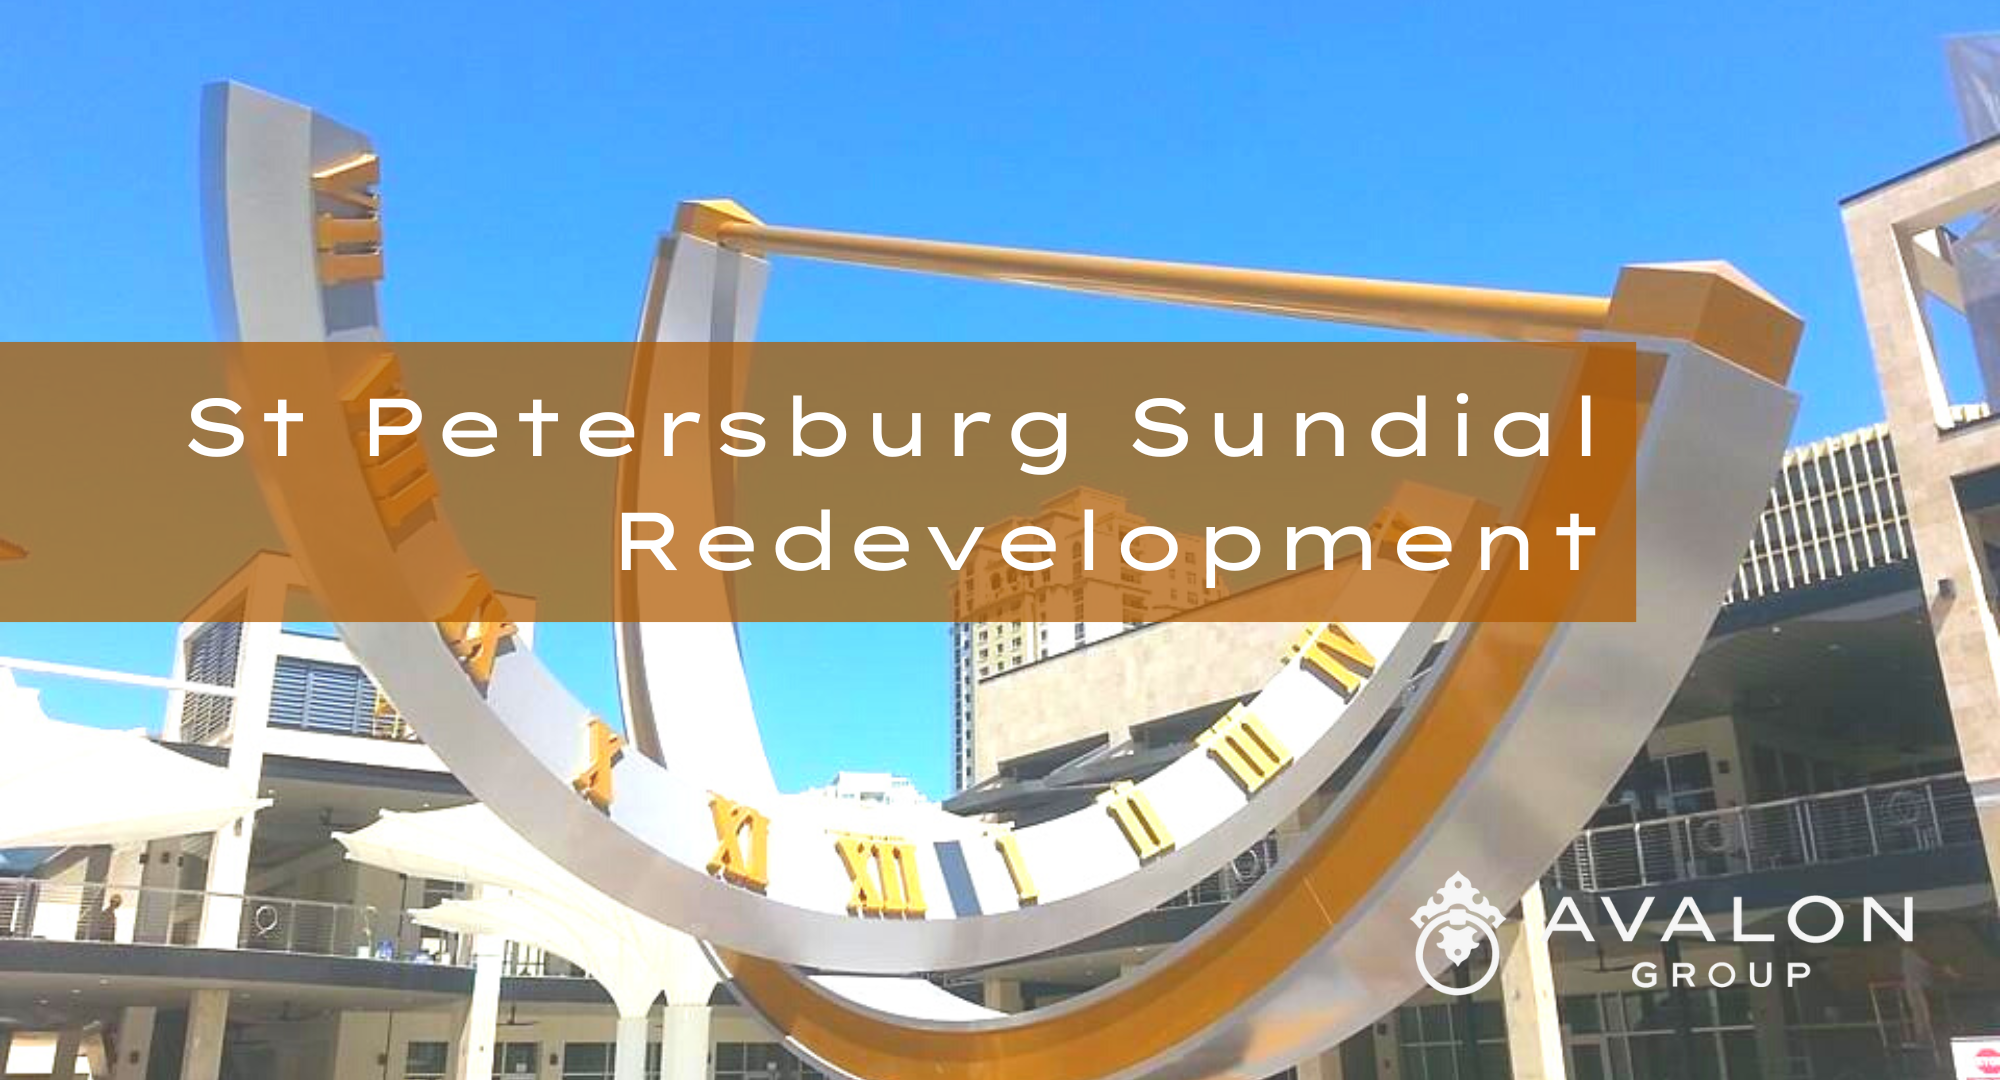 St Petersburg Sundial Redevelopment Cover Picture shows the sundial statue with a bright blue sky in the background. The statue is silver and gold in color.